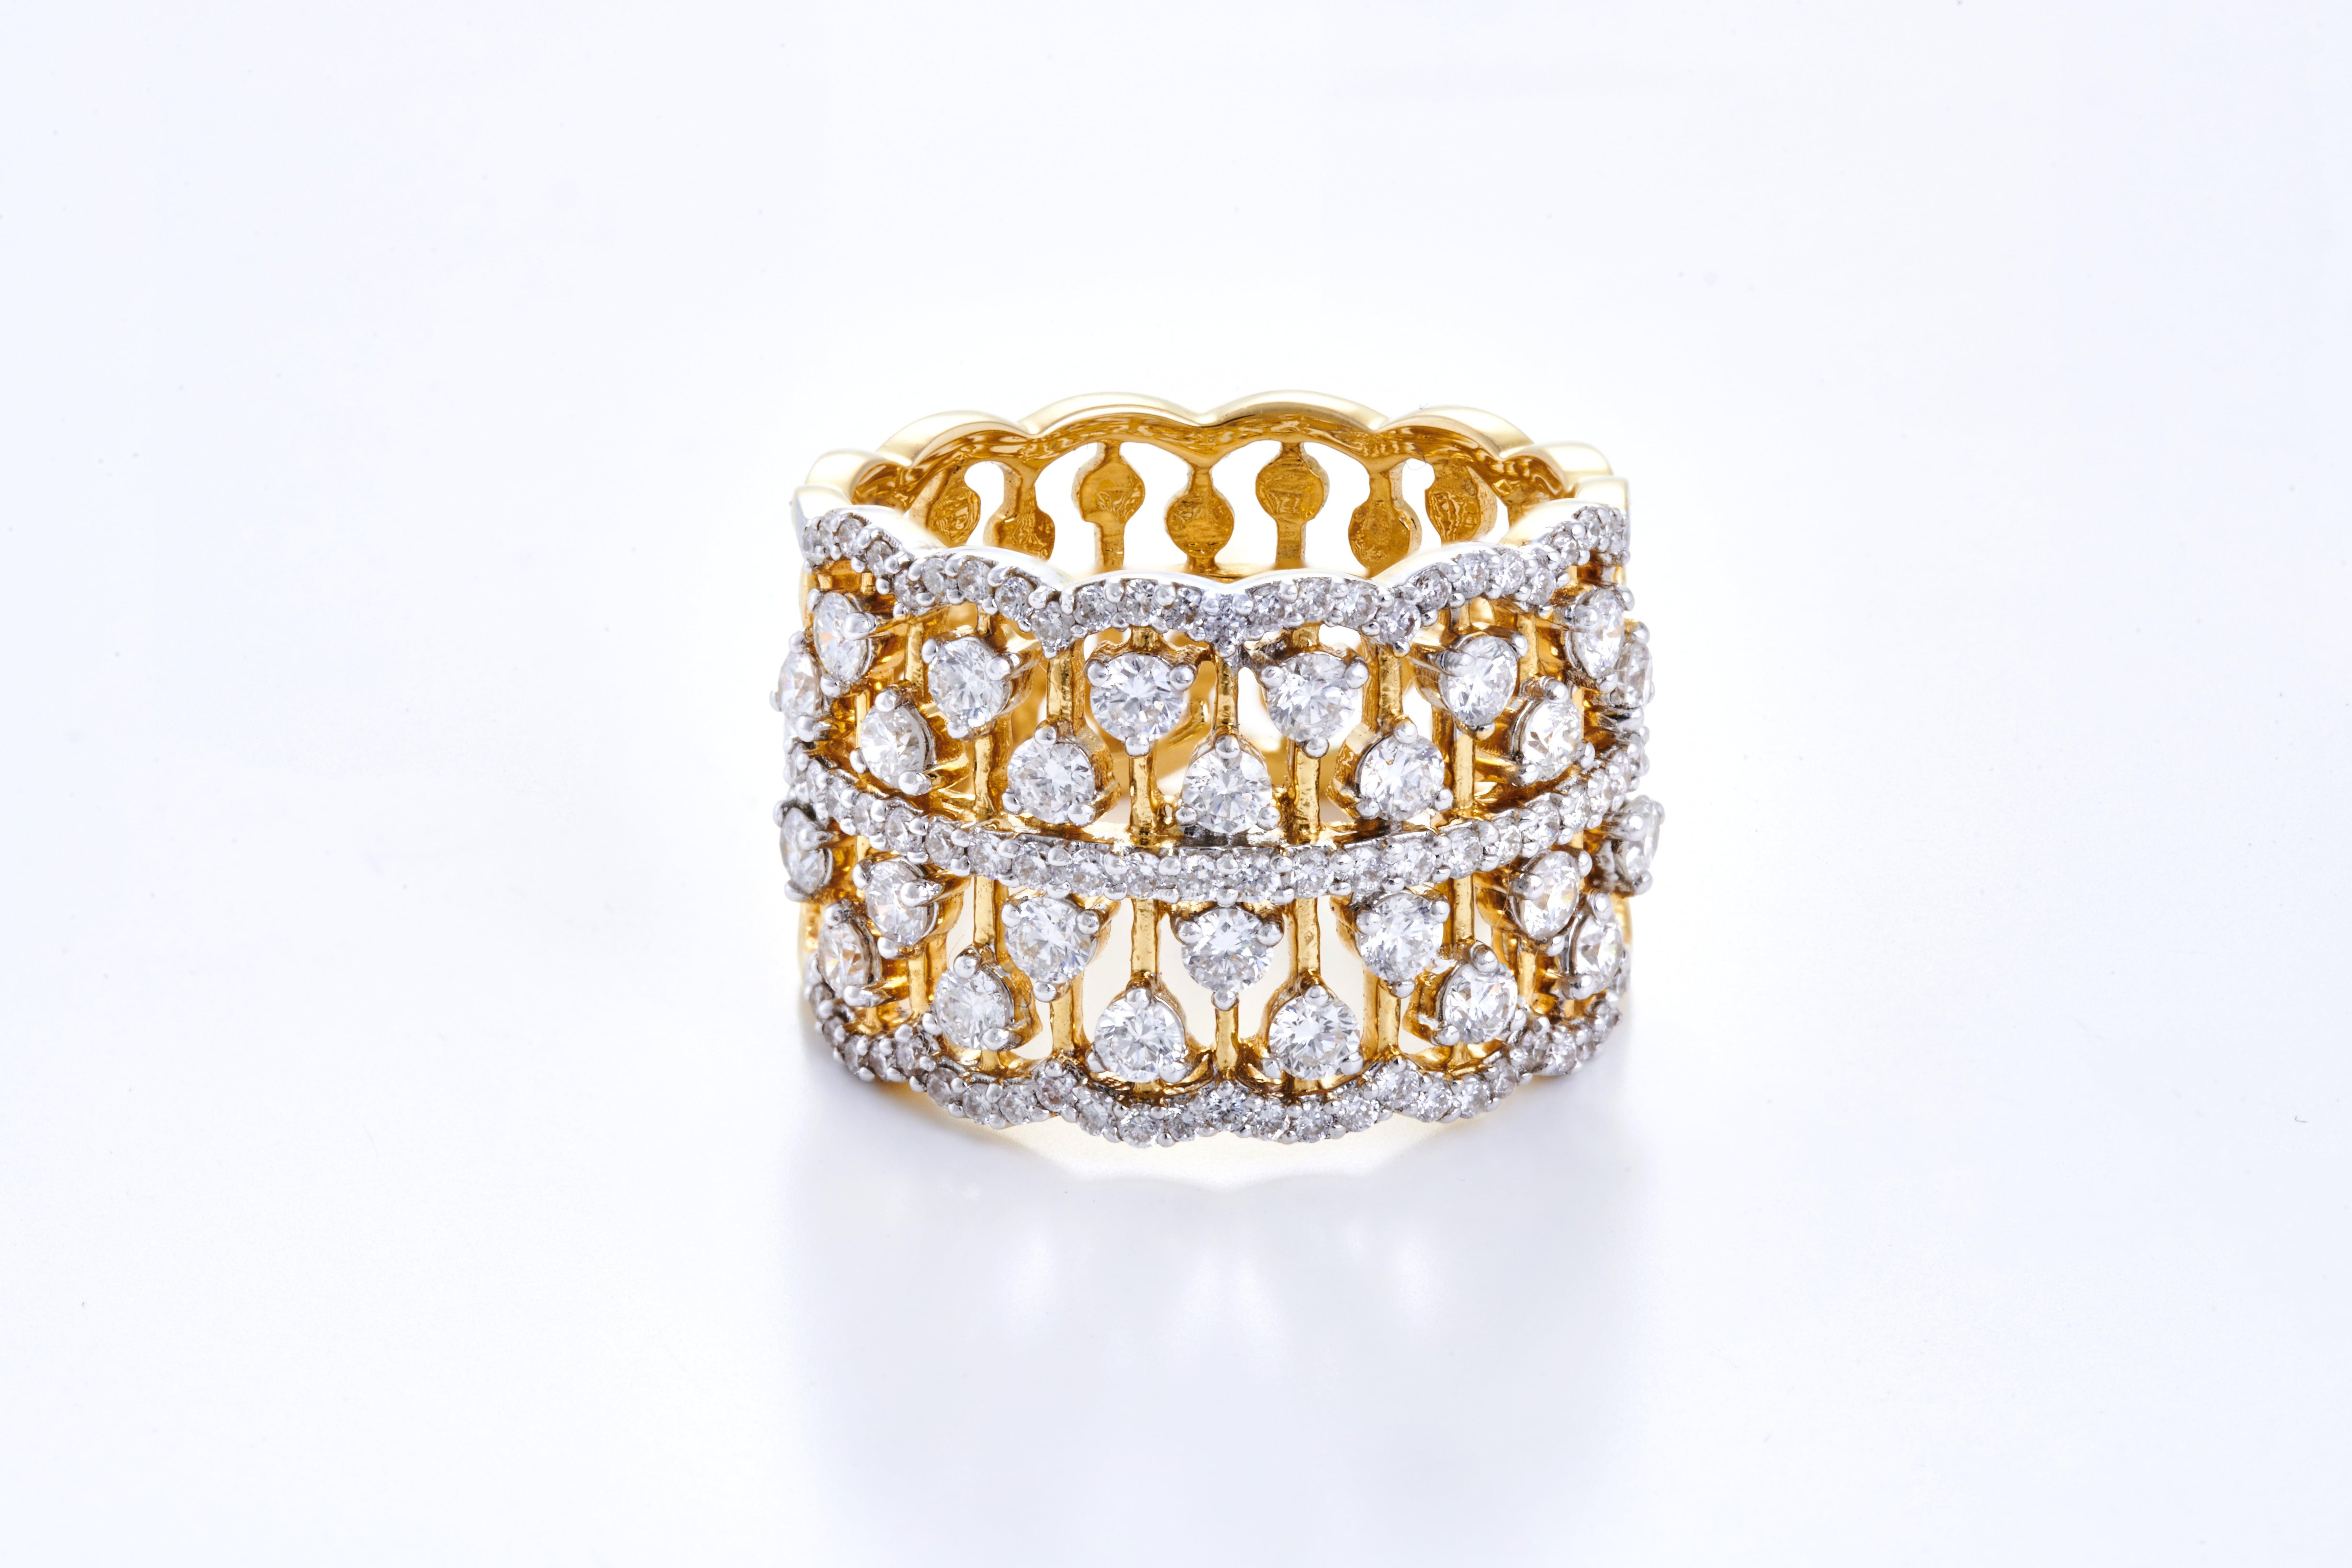 This Ring is studded with 98 pieces of VS quality and G colour weighing 1.24 carats in 7.61 grams of 18K Yellow Gold. 

These diamonds have been carefully picked and selected from authentic sources and complete importance has been given to respect &